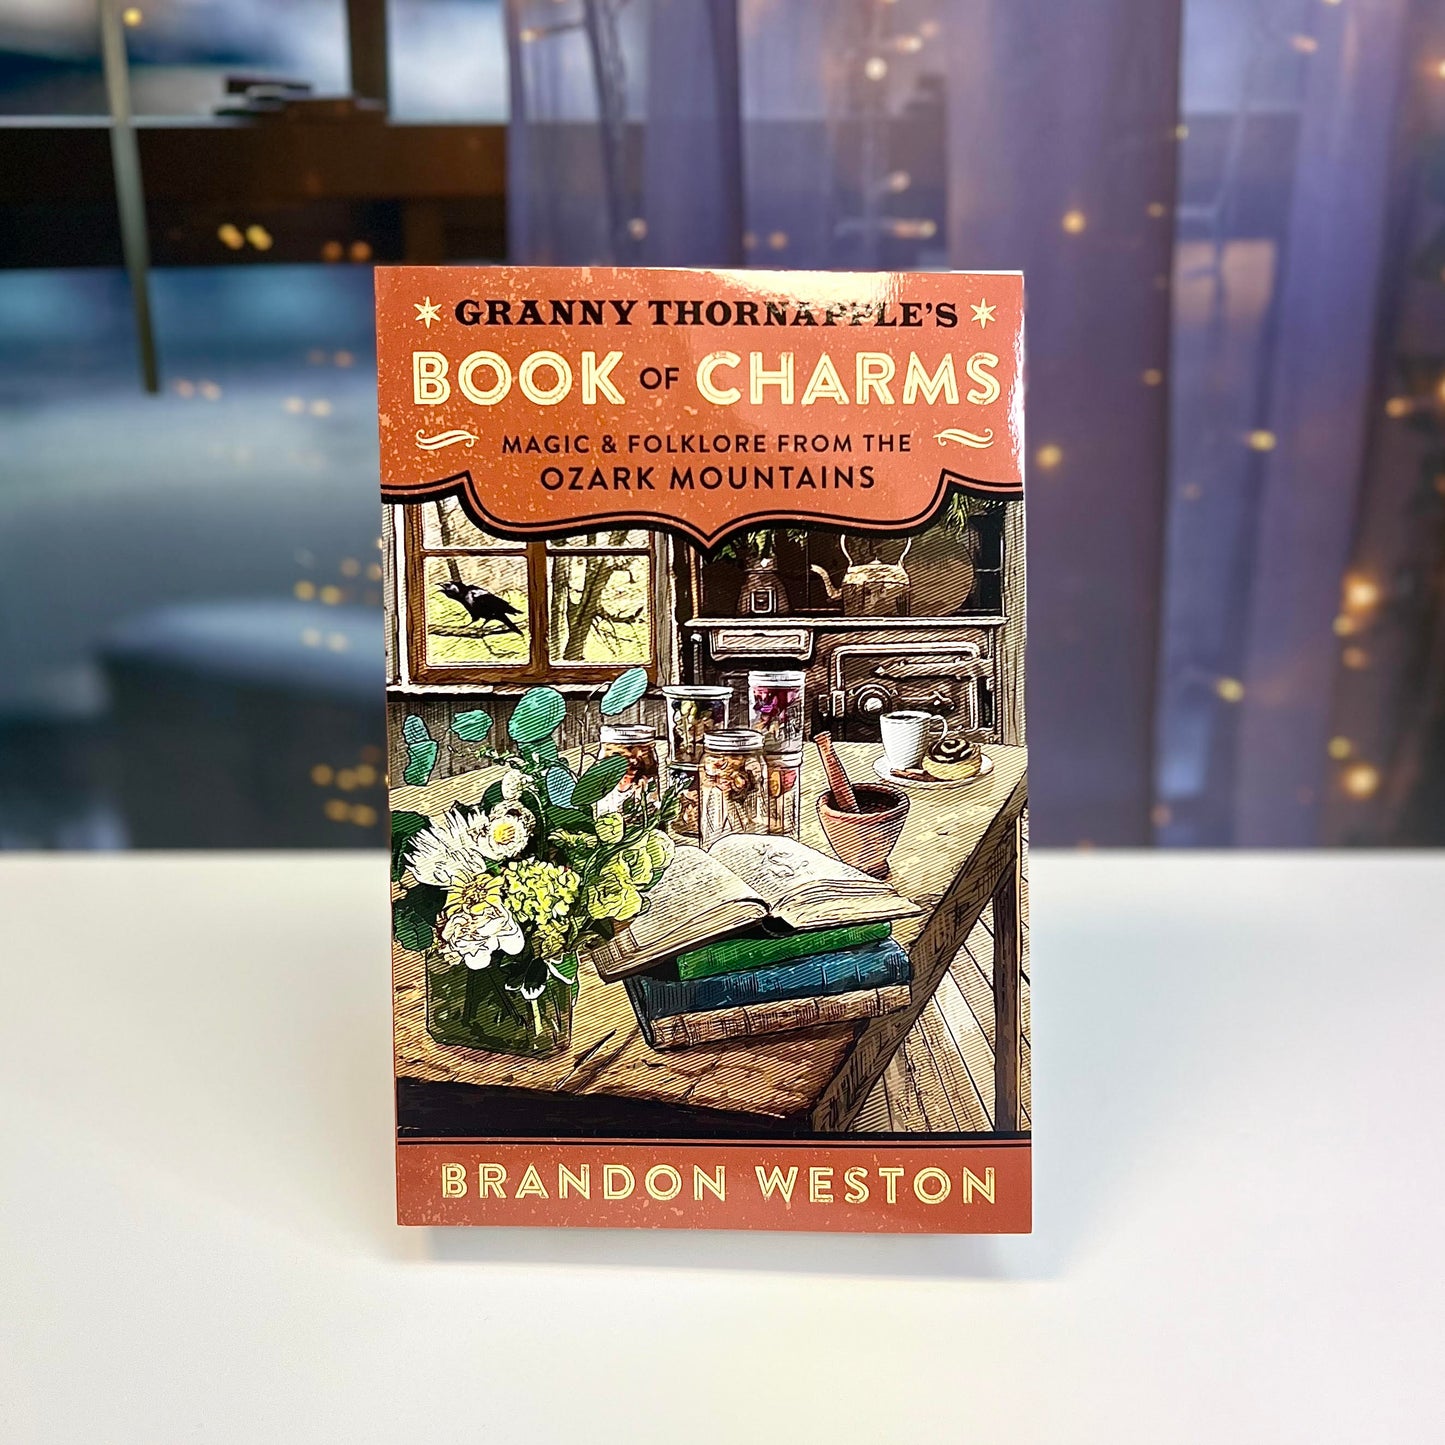 Granny Thornapple's Book of Charms by Brandon Weston